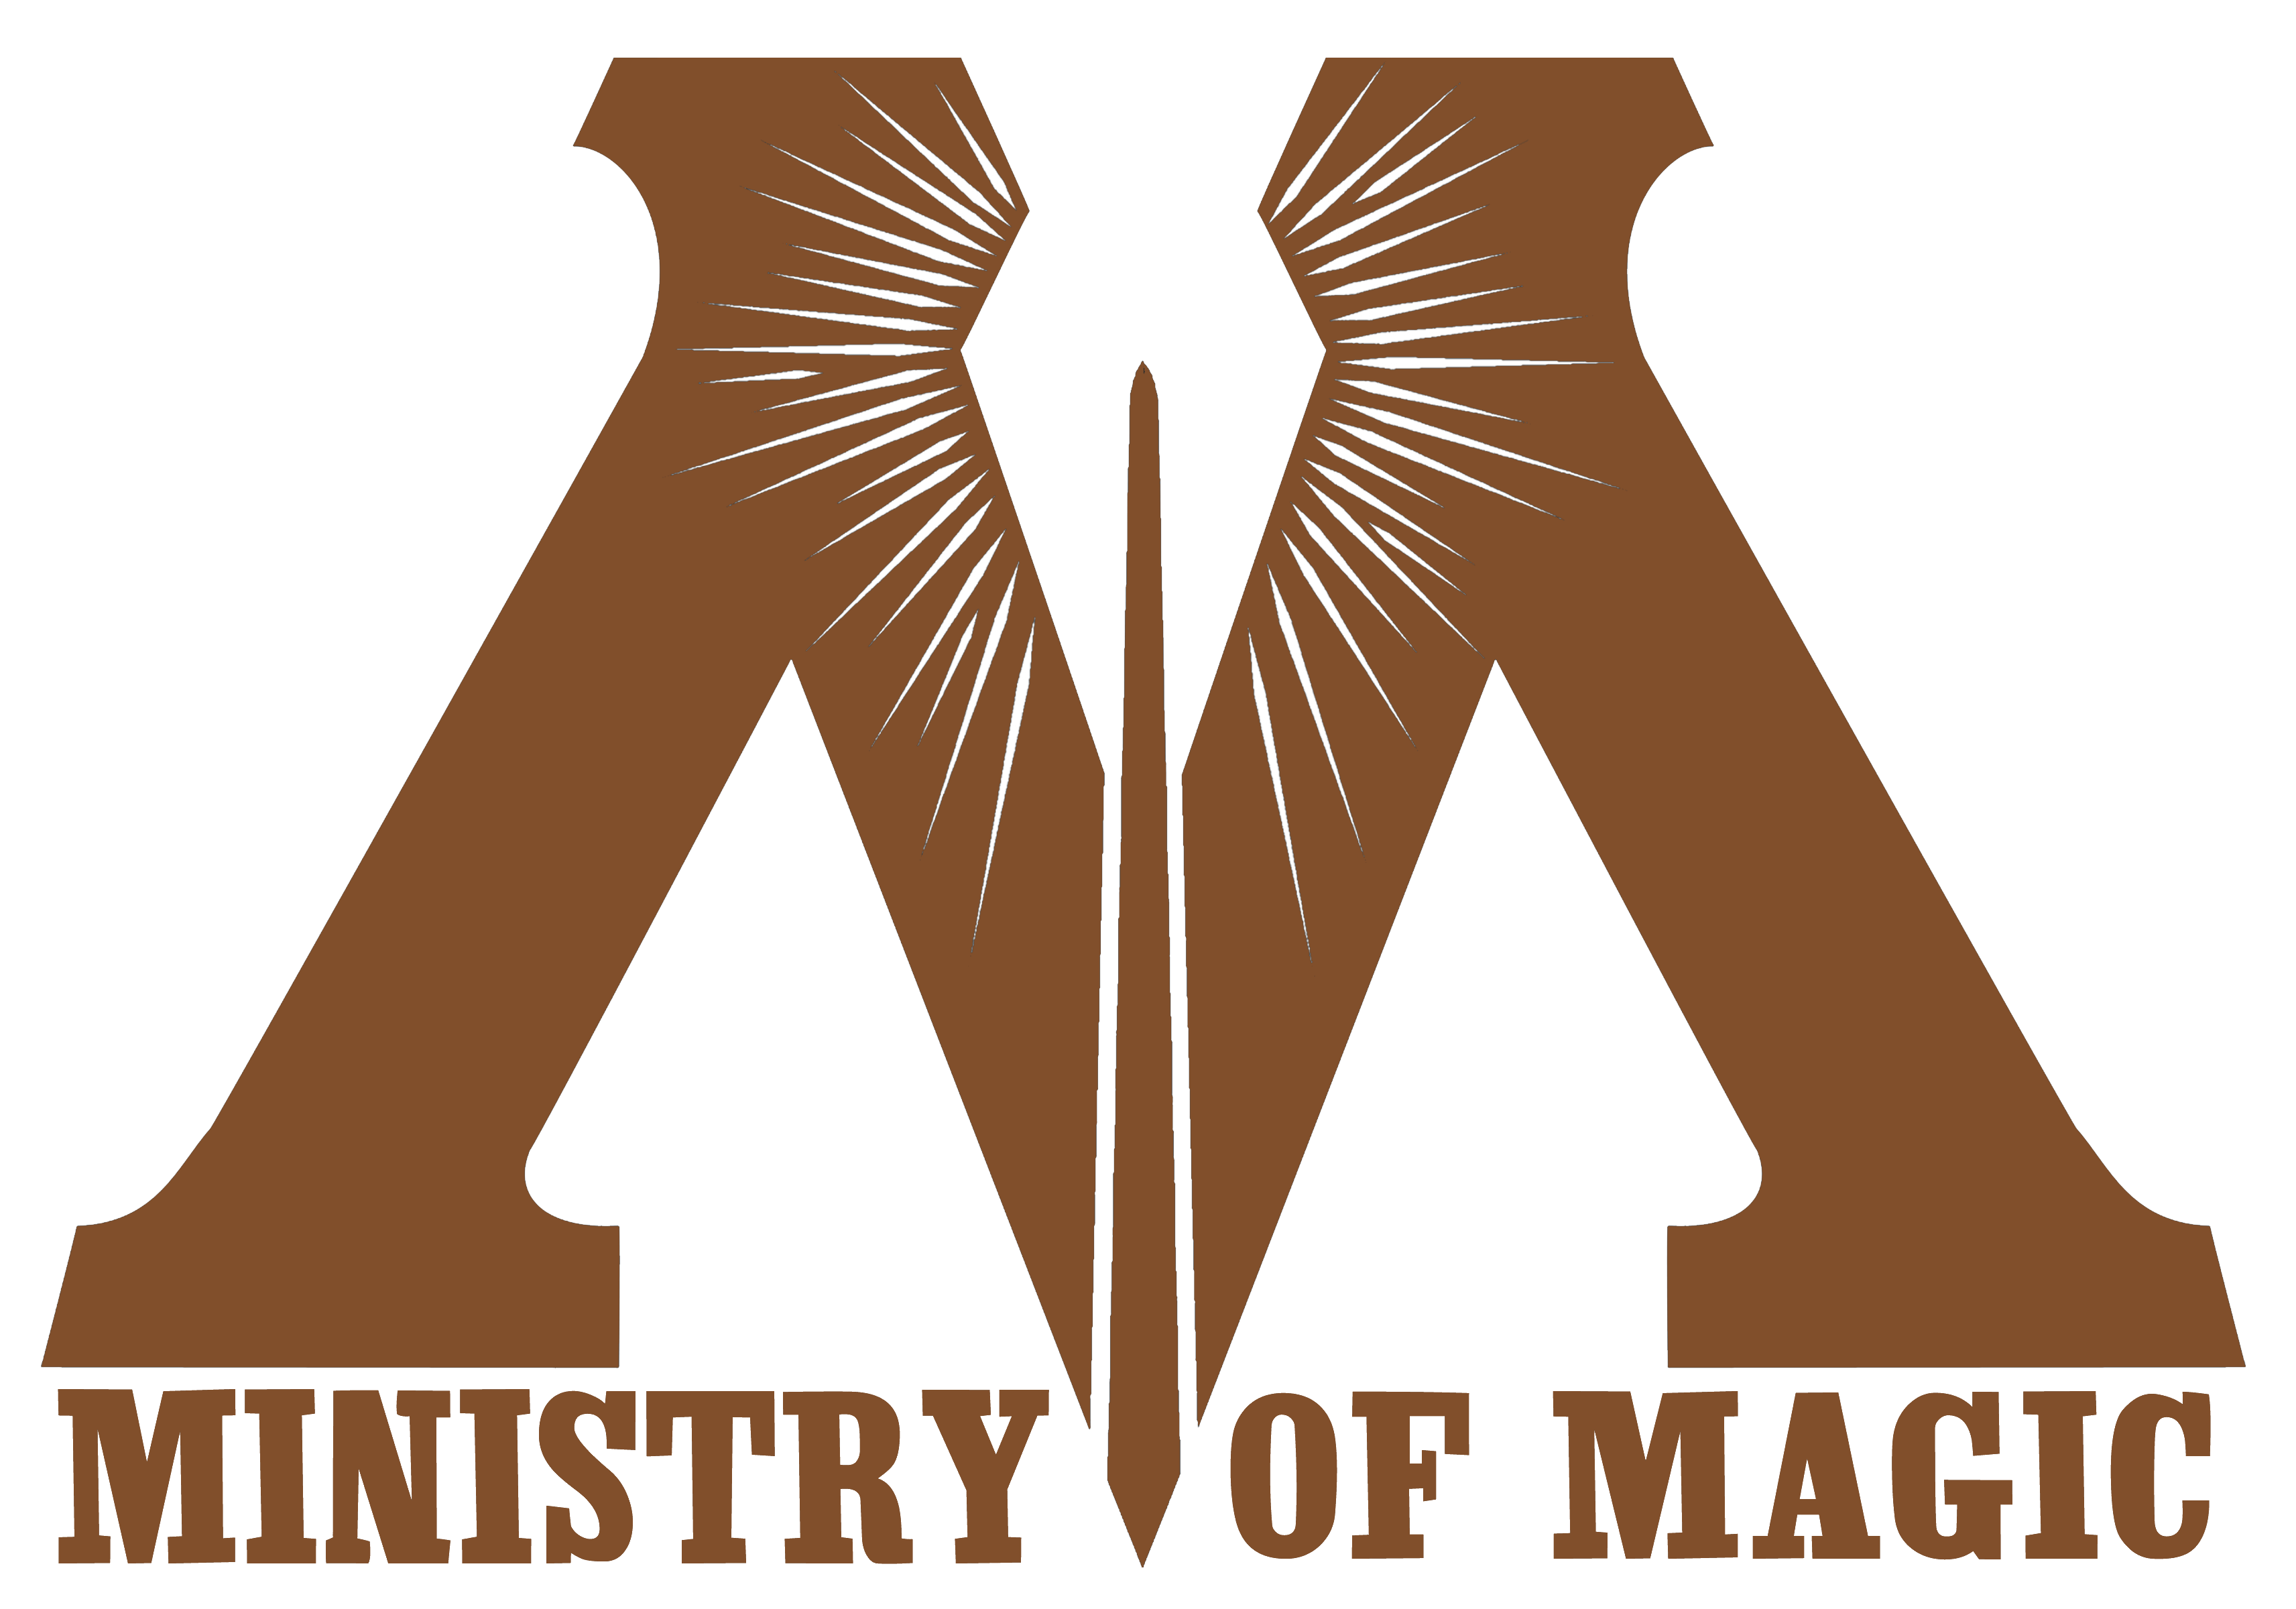 Ministry_of_magic_logo.png